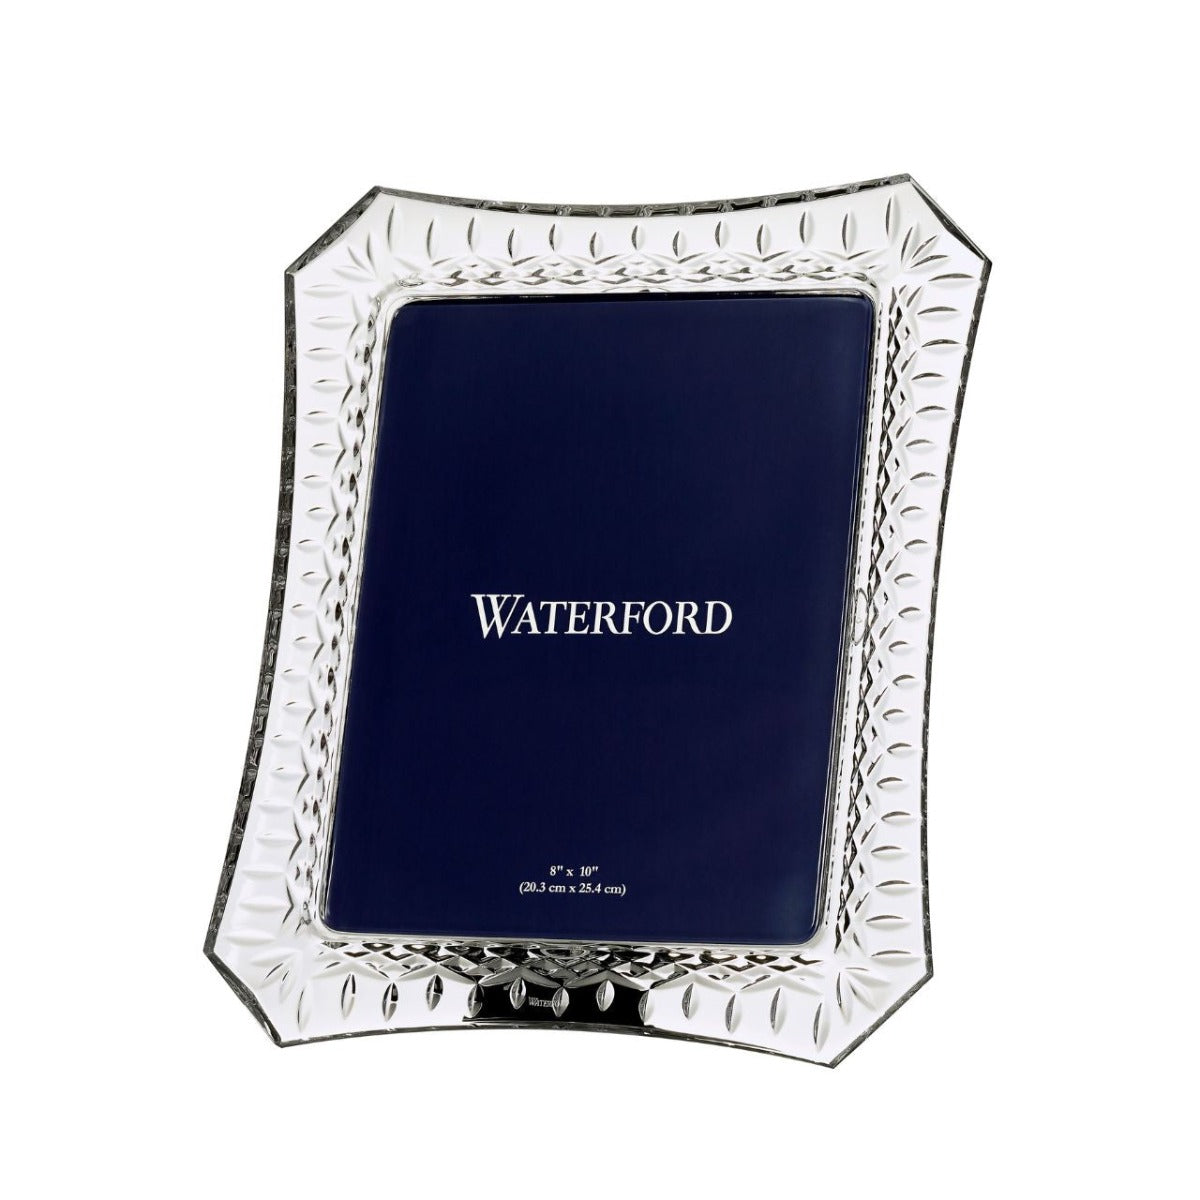 Waterford Crystal Lismore Picture Frame 8 x 10in  Bring your treasured memories to life with this stunning Lismore 8 x 10 Picture Frame, a generously sized crystal photo frame that’s perfect for displaying on a desk, mantle or table. Crafted from fine crystal, and intricately adorned with our beloved Lismore pattern, this elegant picture frame is a stunning combination of brilliance and clarity that effortlessly enhances your fondest memories.